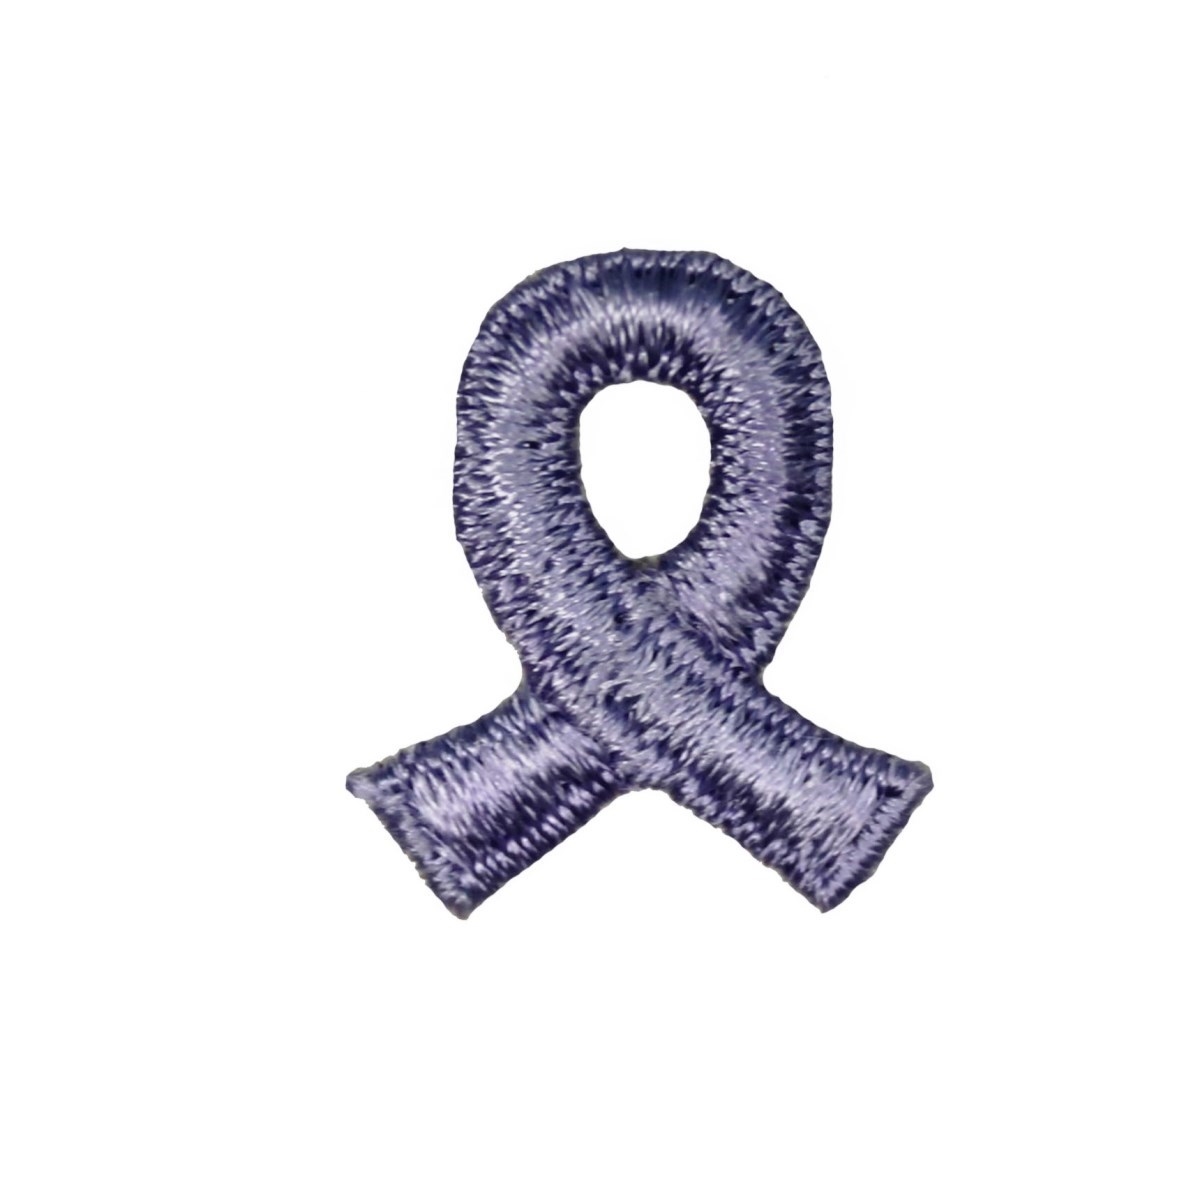 Thinking Of You Get Well Soon Card Sympathy Card For Him Awareness Periwinkle Ribbon Stomach Cancer Support Card For Her